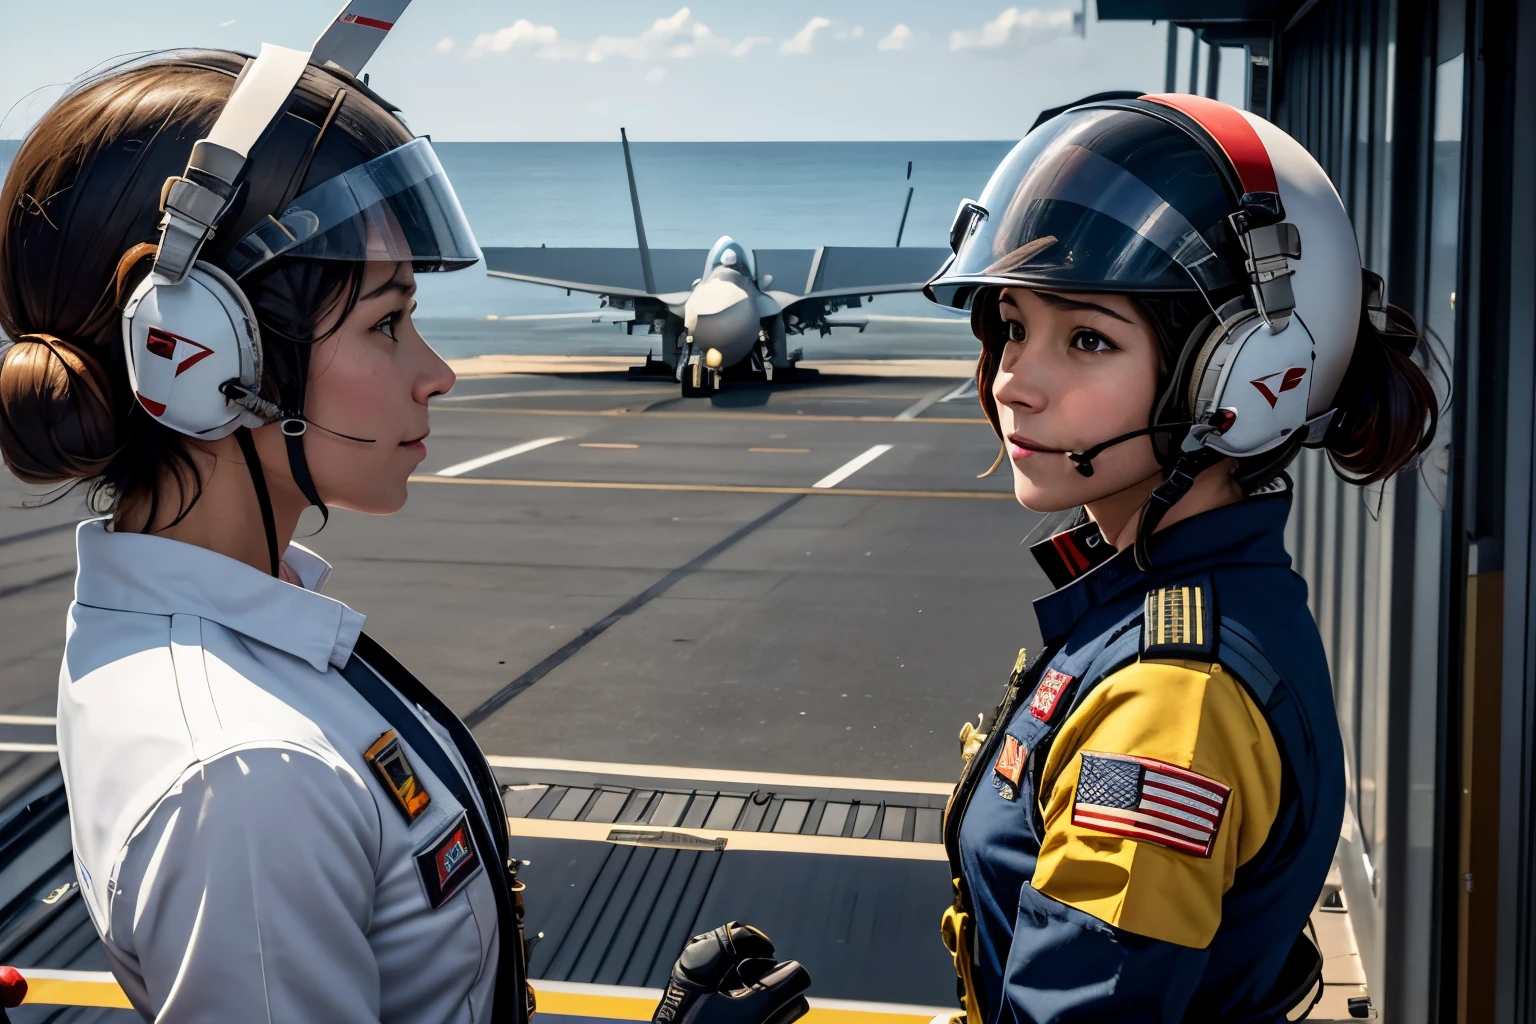 Aircraft carrier flight deck, A female deck worker gives departure instructions to a fighter jet., Helmet on the head, Intercom microphone on the mouth, Dynamic poses, deck worker uniform, Crouch next to the flight deck, outside of house, back-view, Give a signal with your left arm to the fighter plane, fighter jet taking off